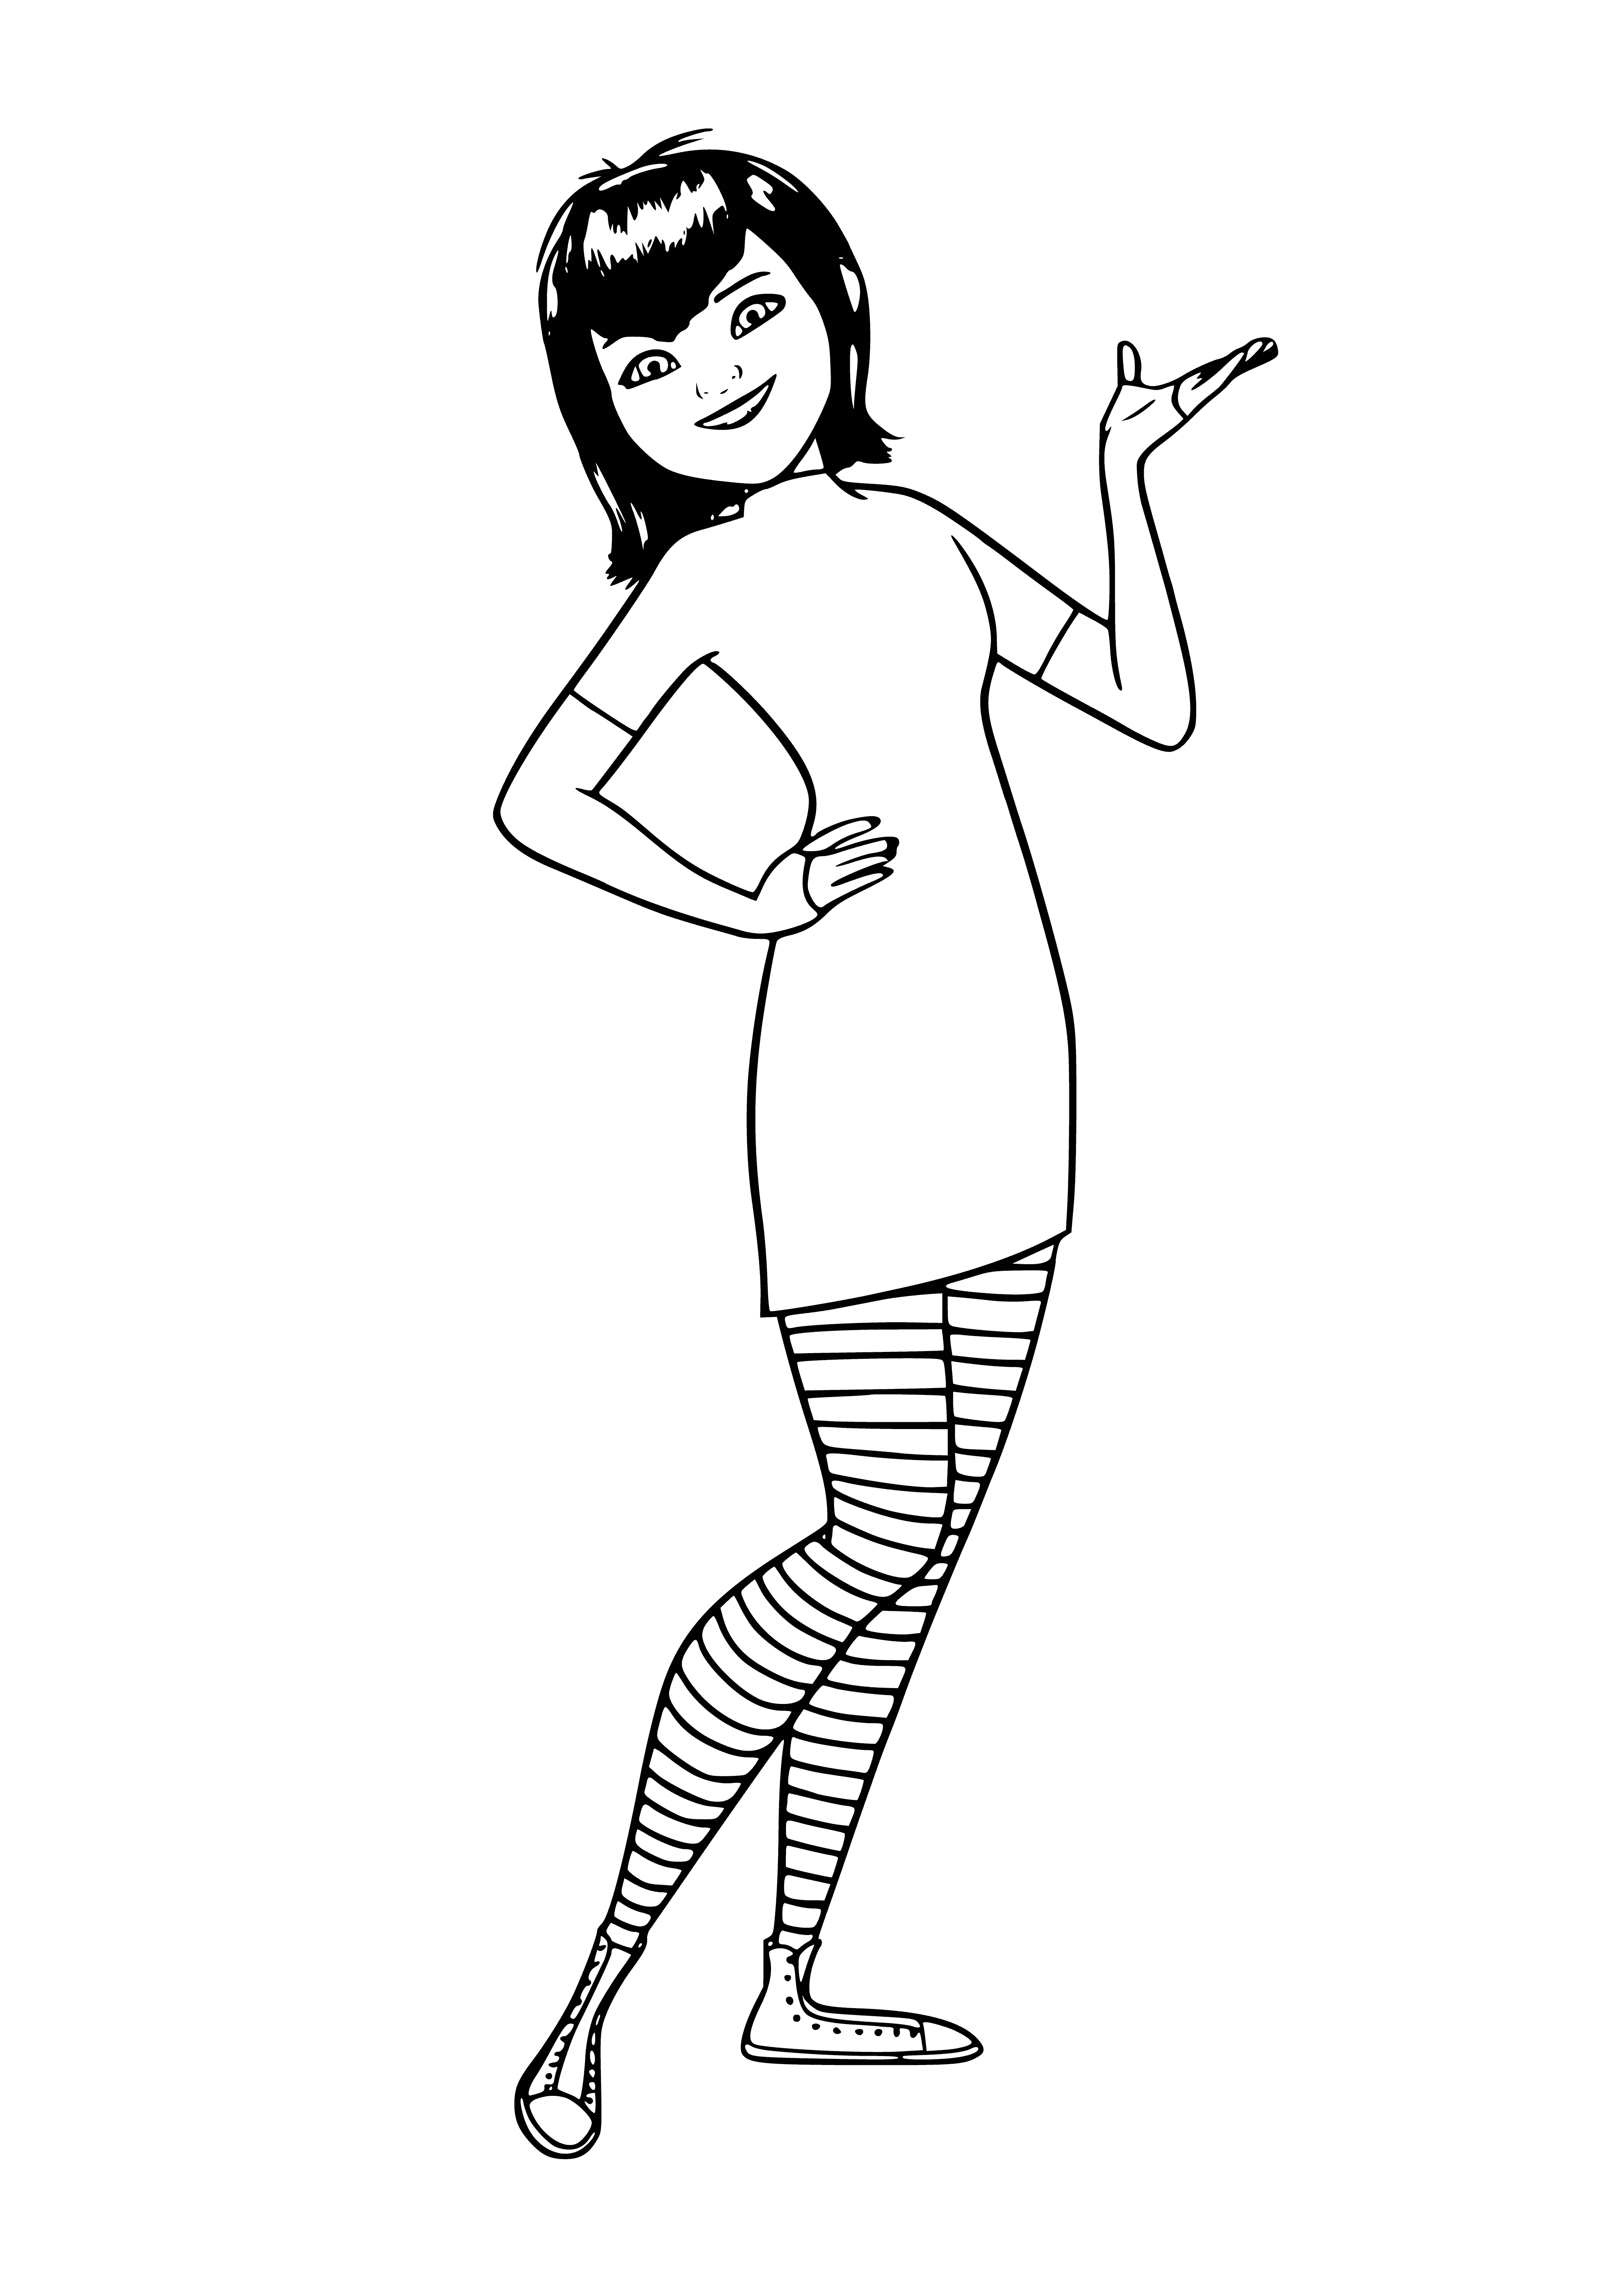 coloring page: Mavis stands ready to explore a mysterious castle, suitcase in one hand and optimism in the other.